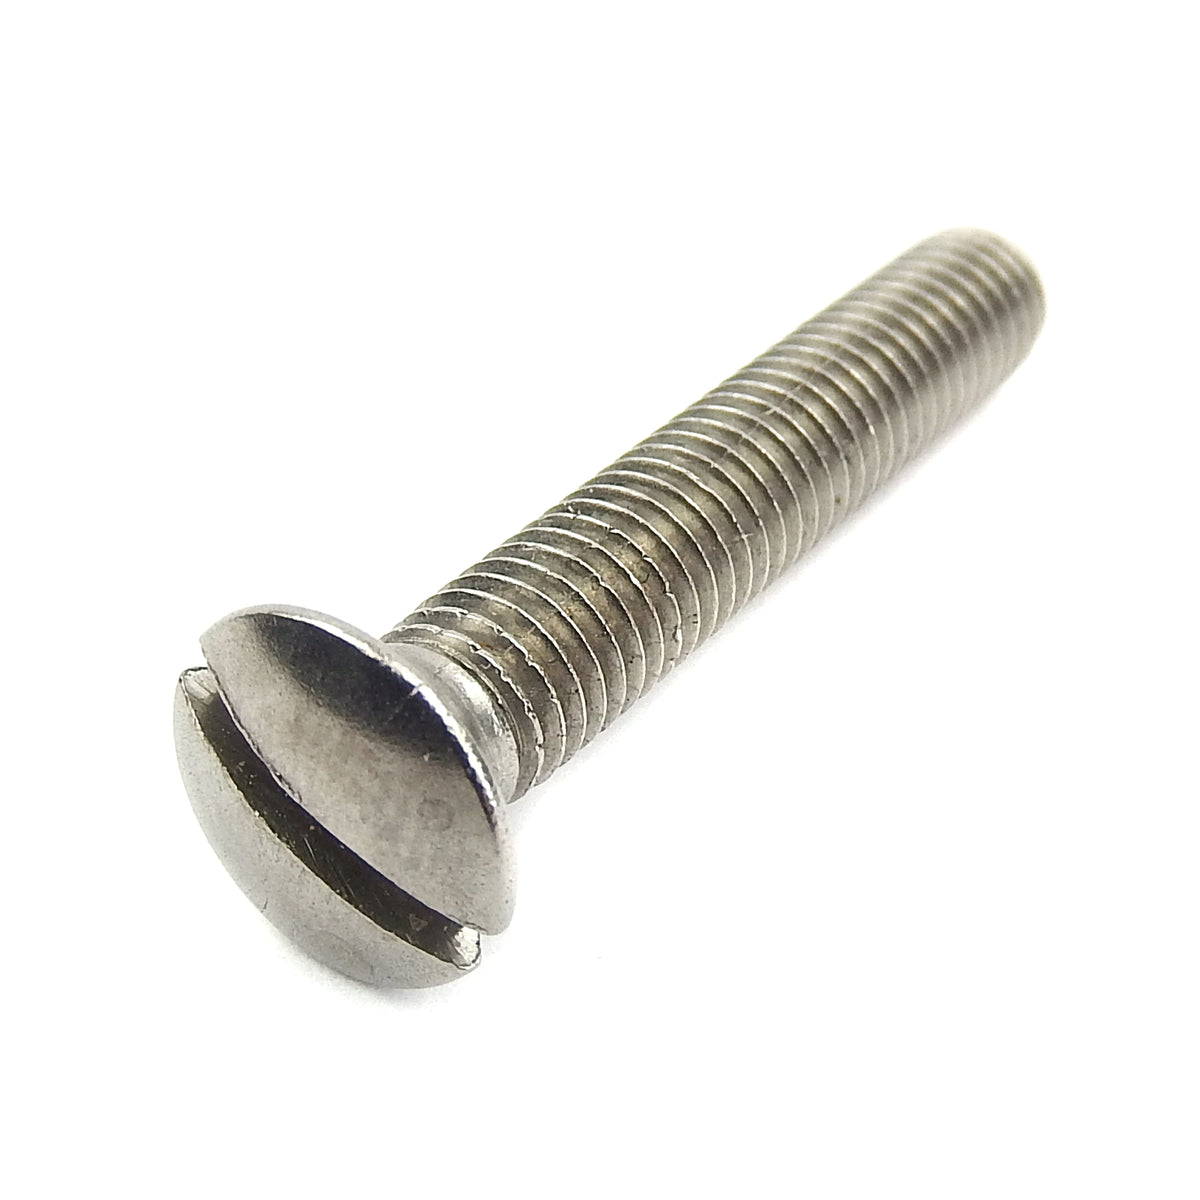 Counter Sunk Raised Screw M6 x 15mm Stainless